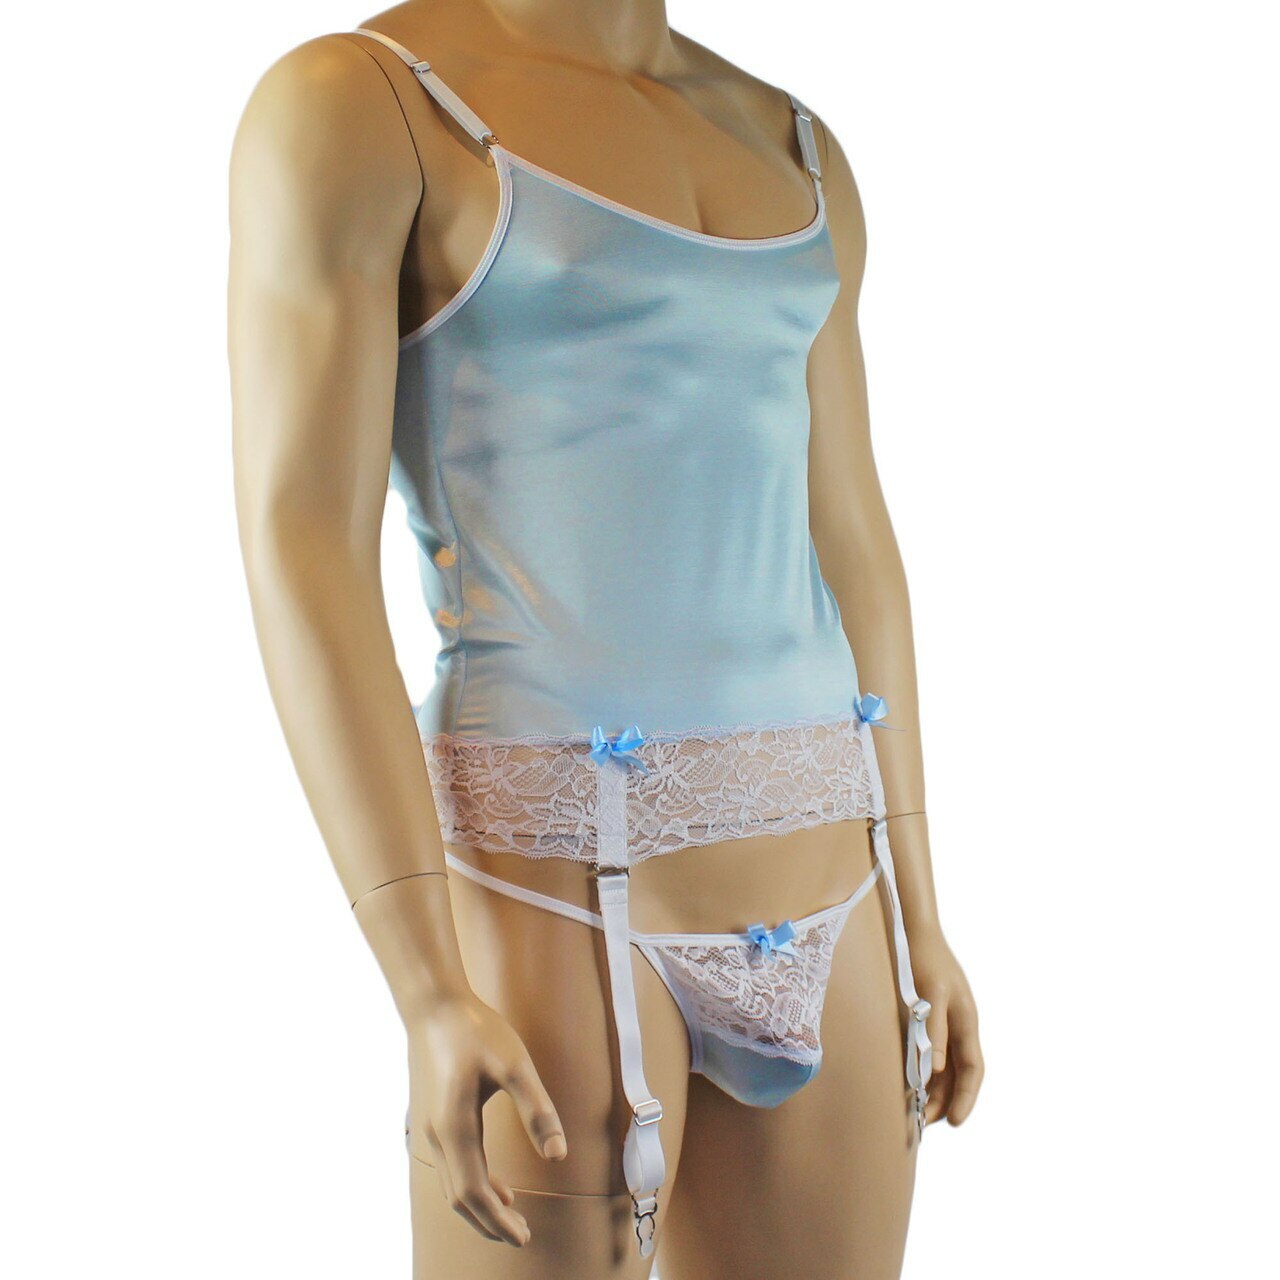 Mens Camisole Bustier Garter Top with Pouch G string (light blue plus other colours)